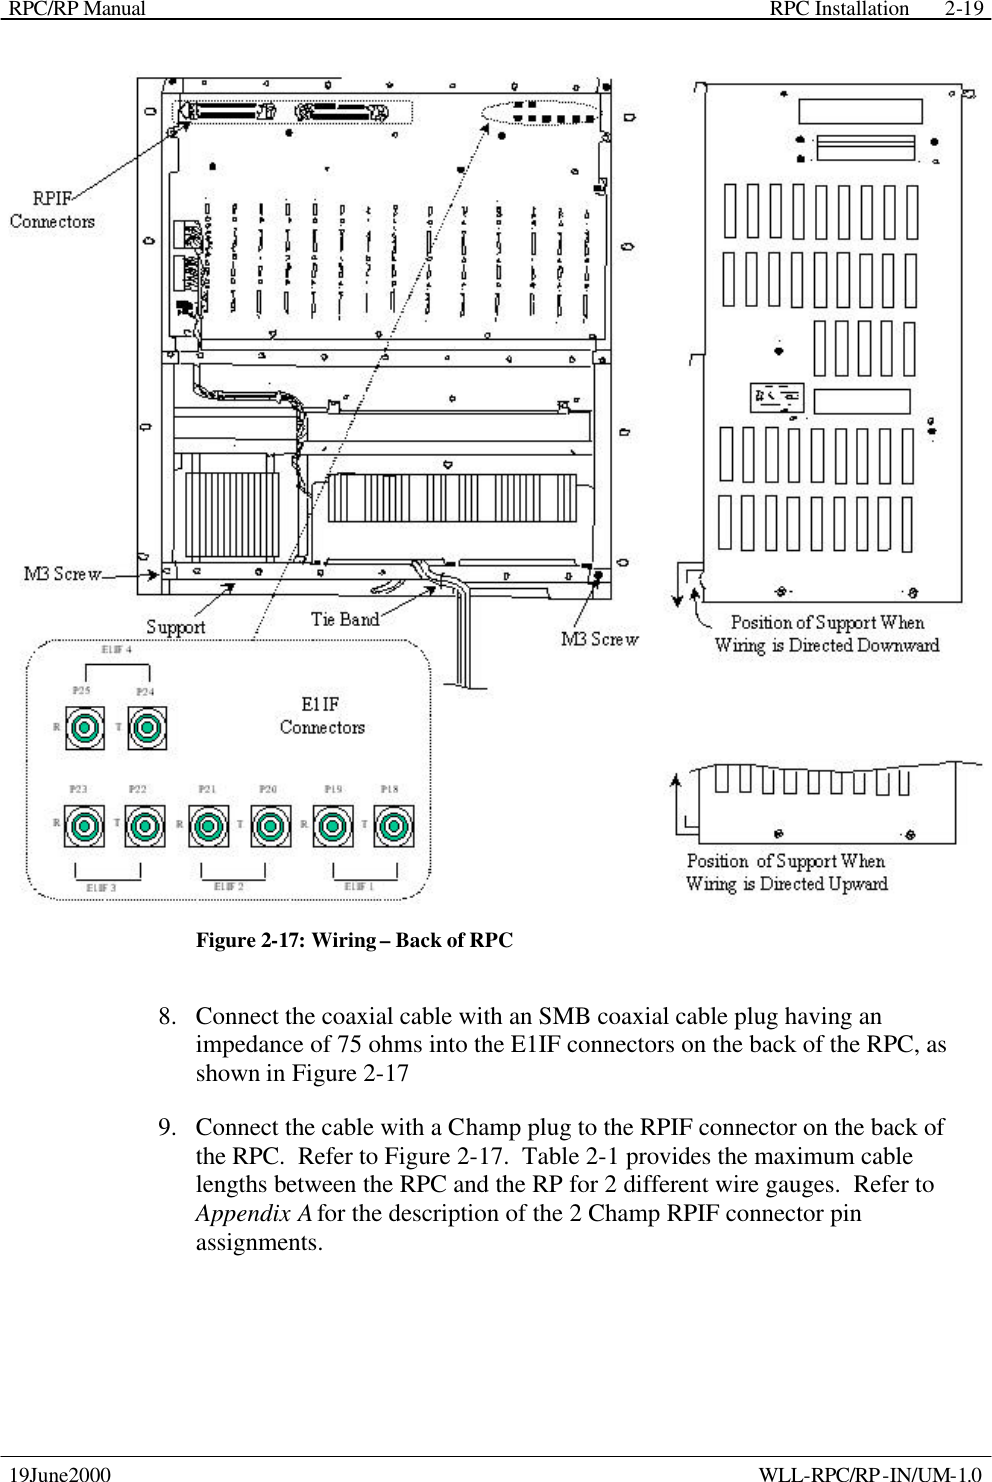 RPC/RP Manual    RPC Installation  19June2000    WLL-RPC/RP-IN/UM-1.0 2-19 Figure 2-17: Wiring – Back of RPC 8.  Connect the coaxial cable with an SMB coaxial cable plug having an impedance of 75 ohms into the E1IF connectors on the back of the RPC, as shown in Figure 2-17 9.  Connect the cable with a Champ plug to the RPIF connector on the back of the RPC.  Refer to Figure 2-17.  Table 2-1 provides the maximum cable lengths between the RPC and the RP for 2 different wire gauges.  Refer to Appendix A for the description of the 2 Champ RPIF connector pin assignments. 